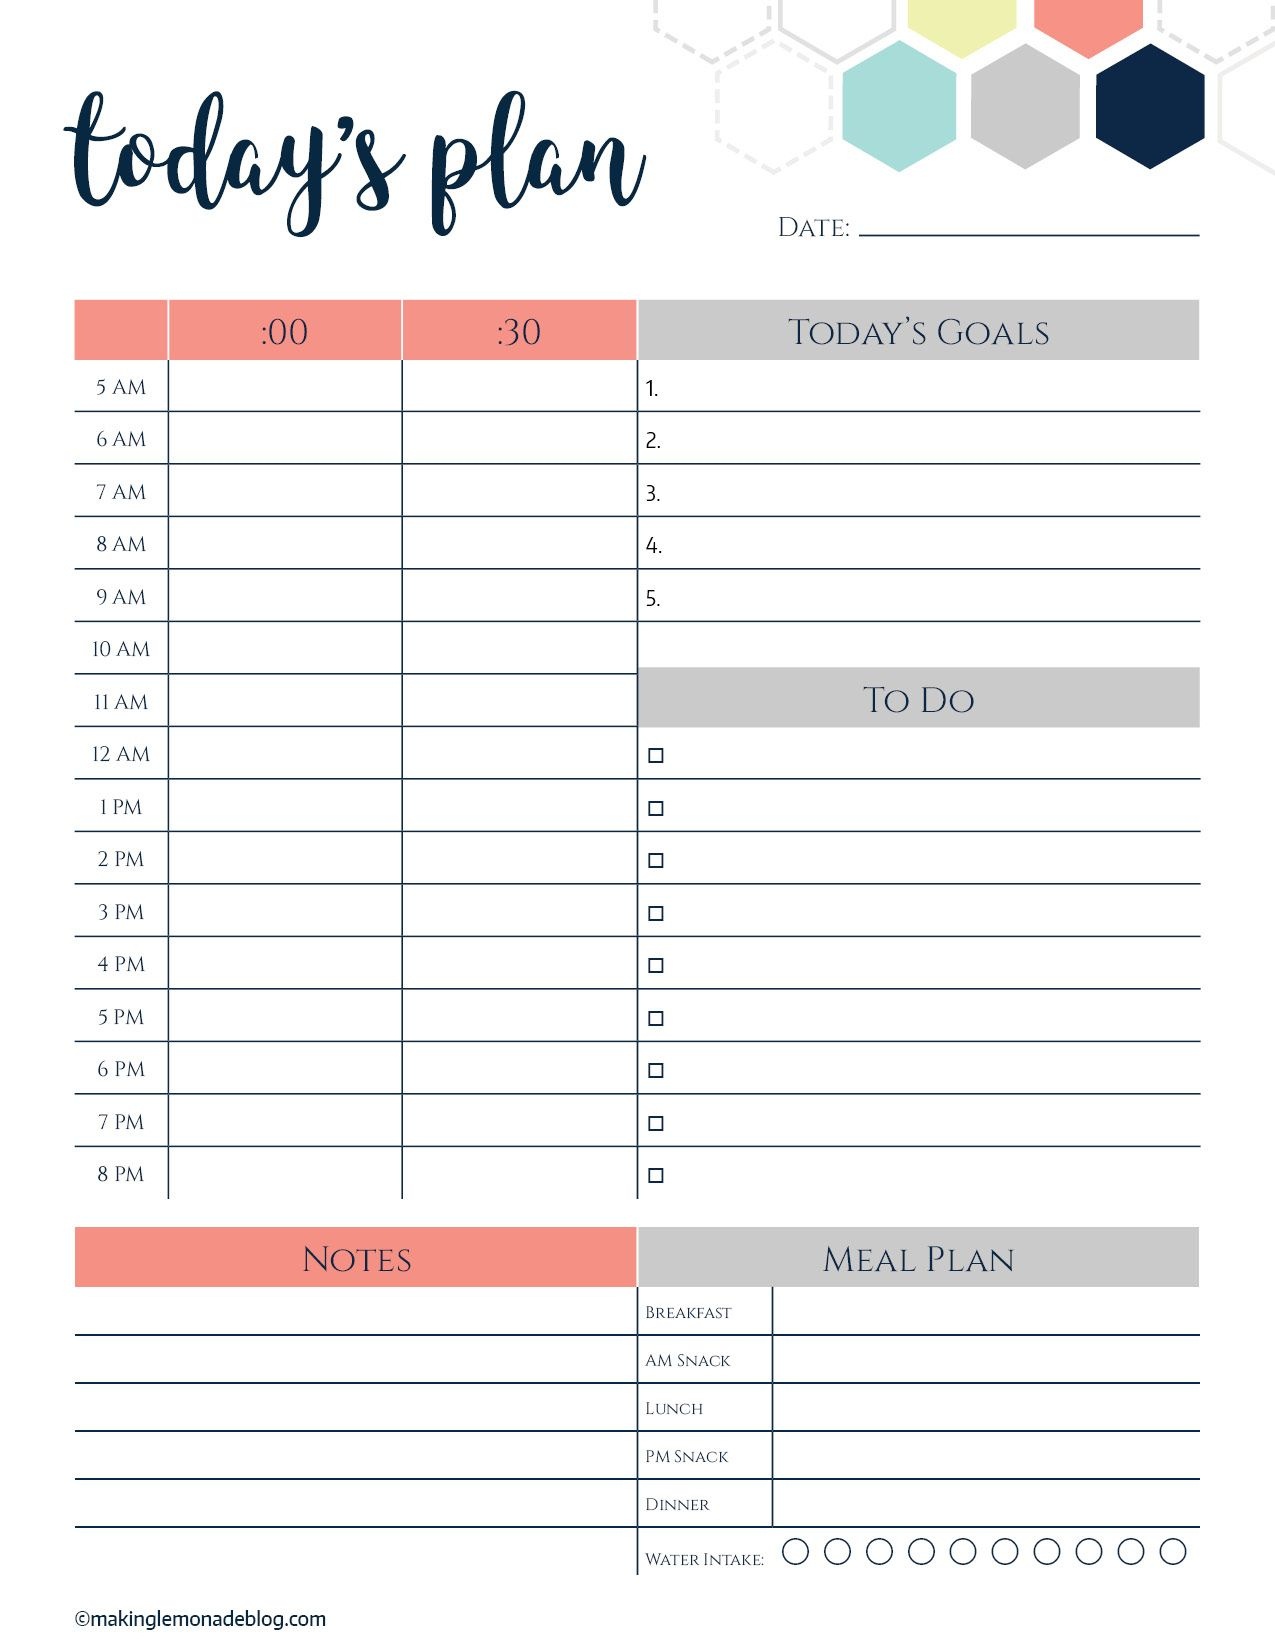 This Free Printable Daily Planner Changes Everything. Finally A Way - Free Printable Daily Schedule Chart